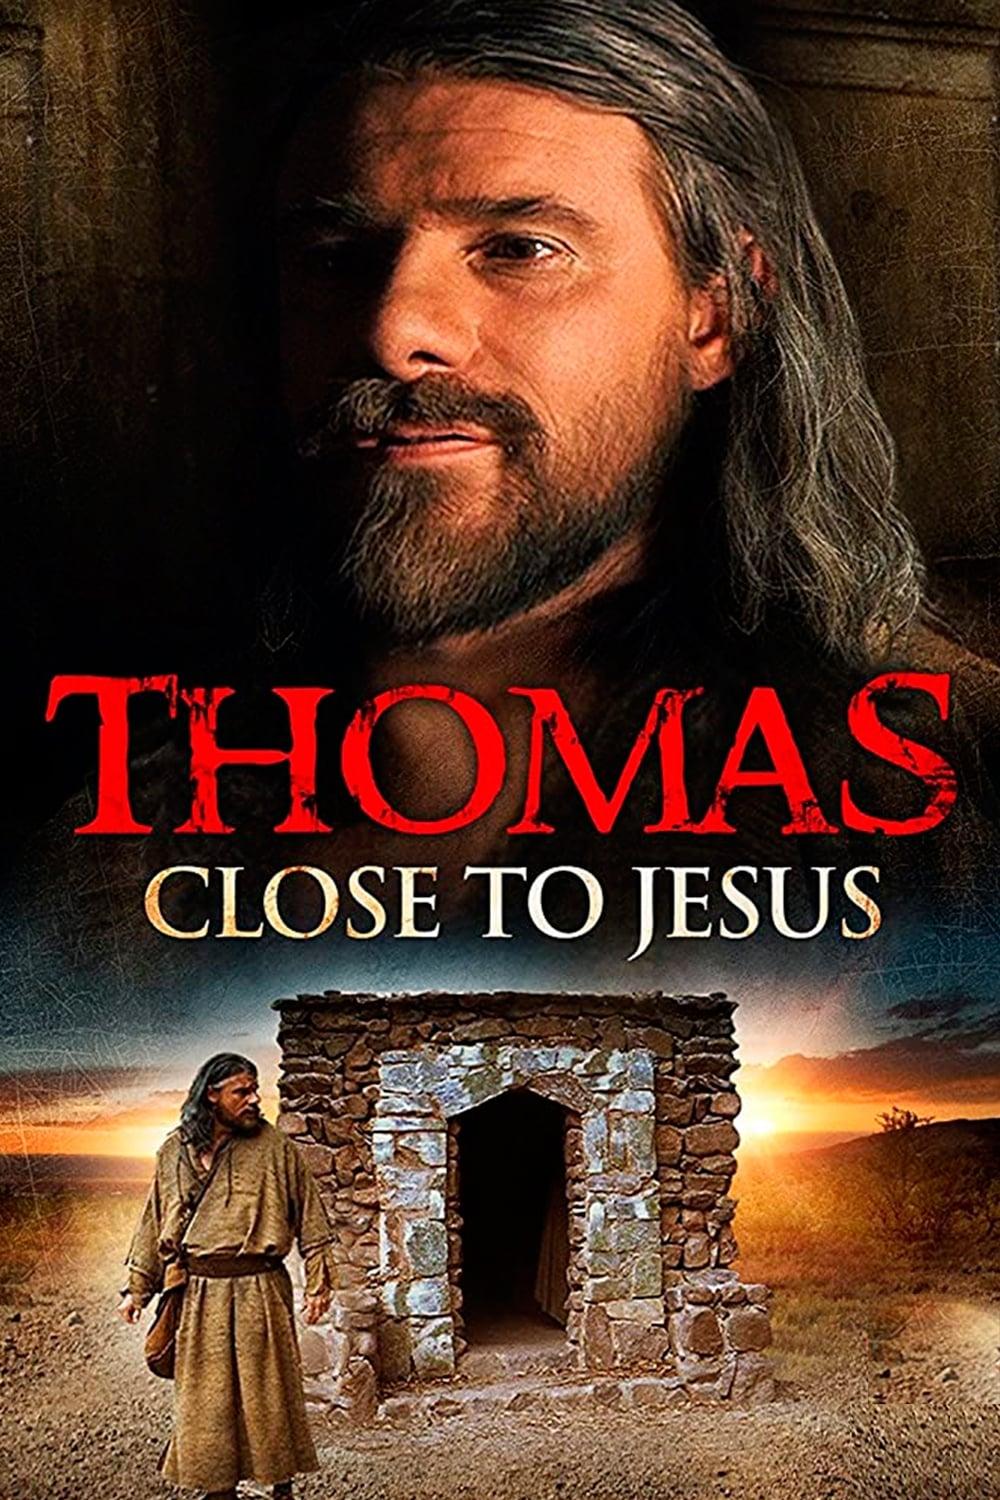 The Friends of Jesus: Thomas poster